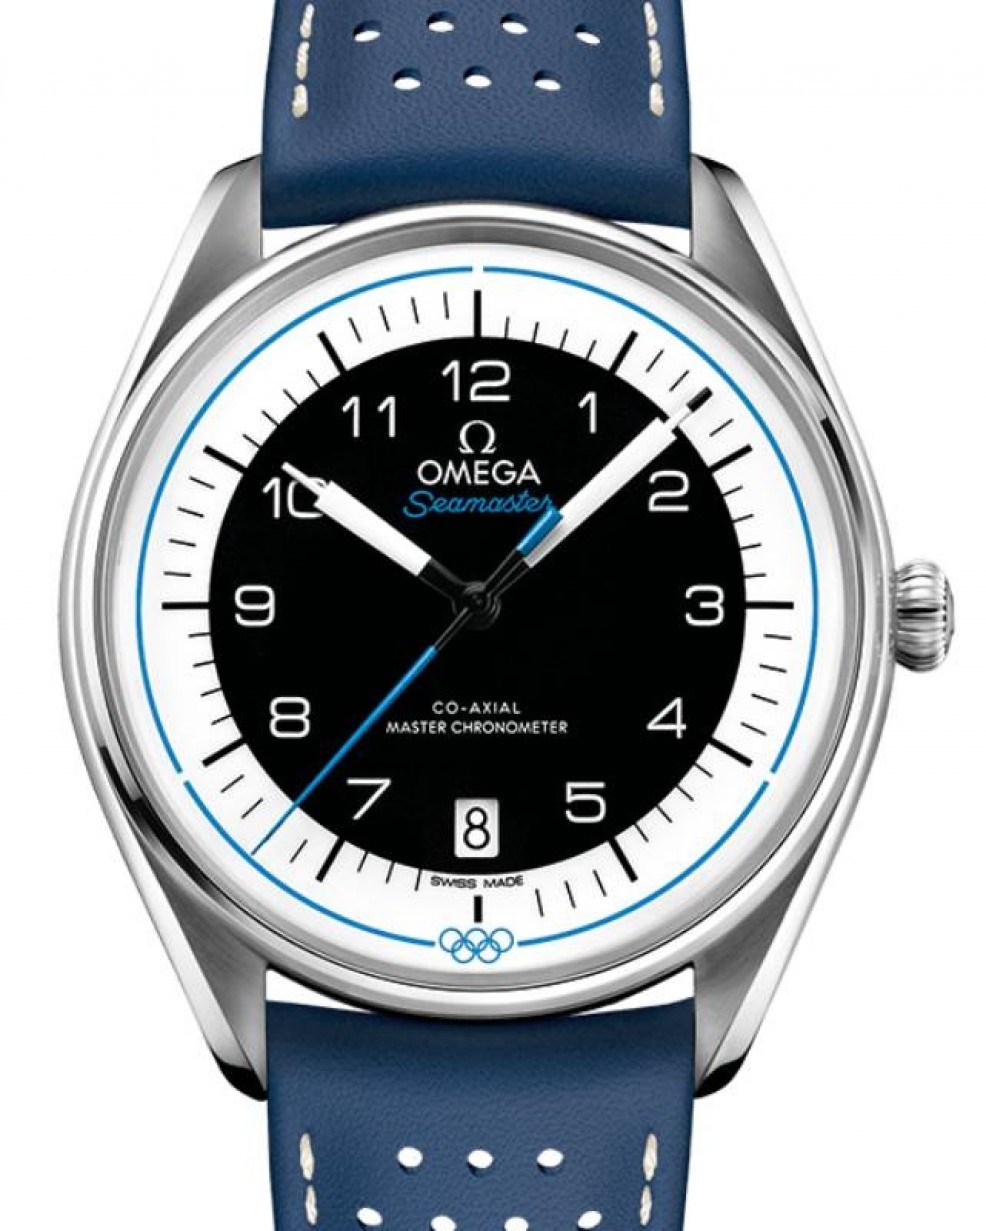 Omega Seamaster Olympic Official Timekeeper Co-Axial Master Chronometer  39.5mm Stainless Steel Black Dial Blue Leather Strap 522.32.40.20.01.001 -  BRAND NEW